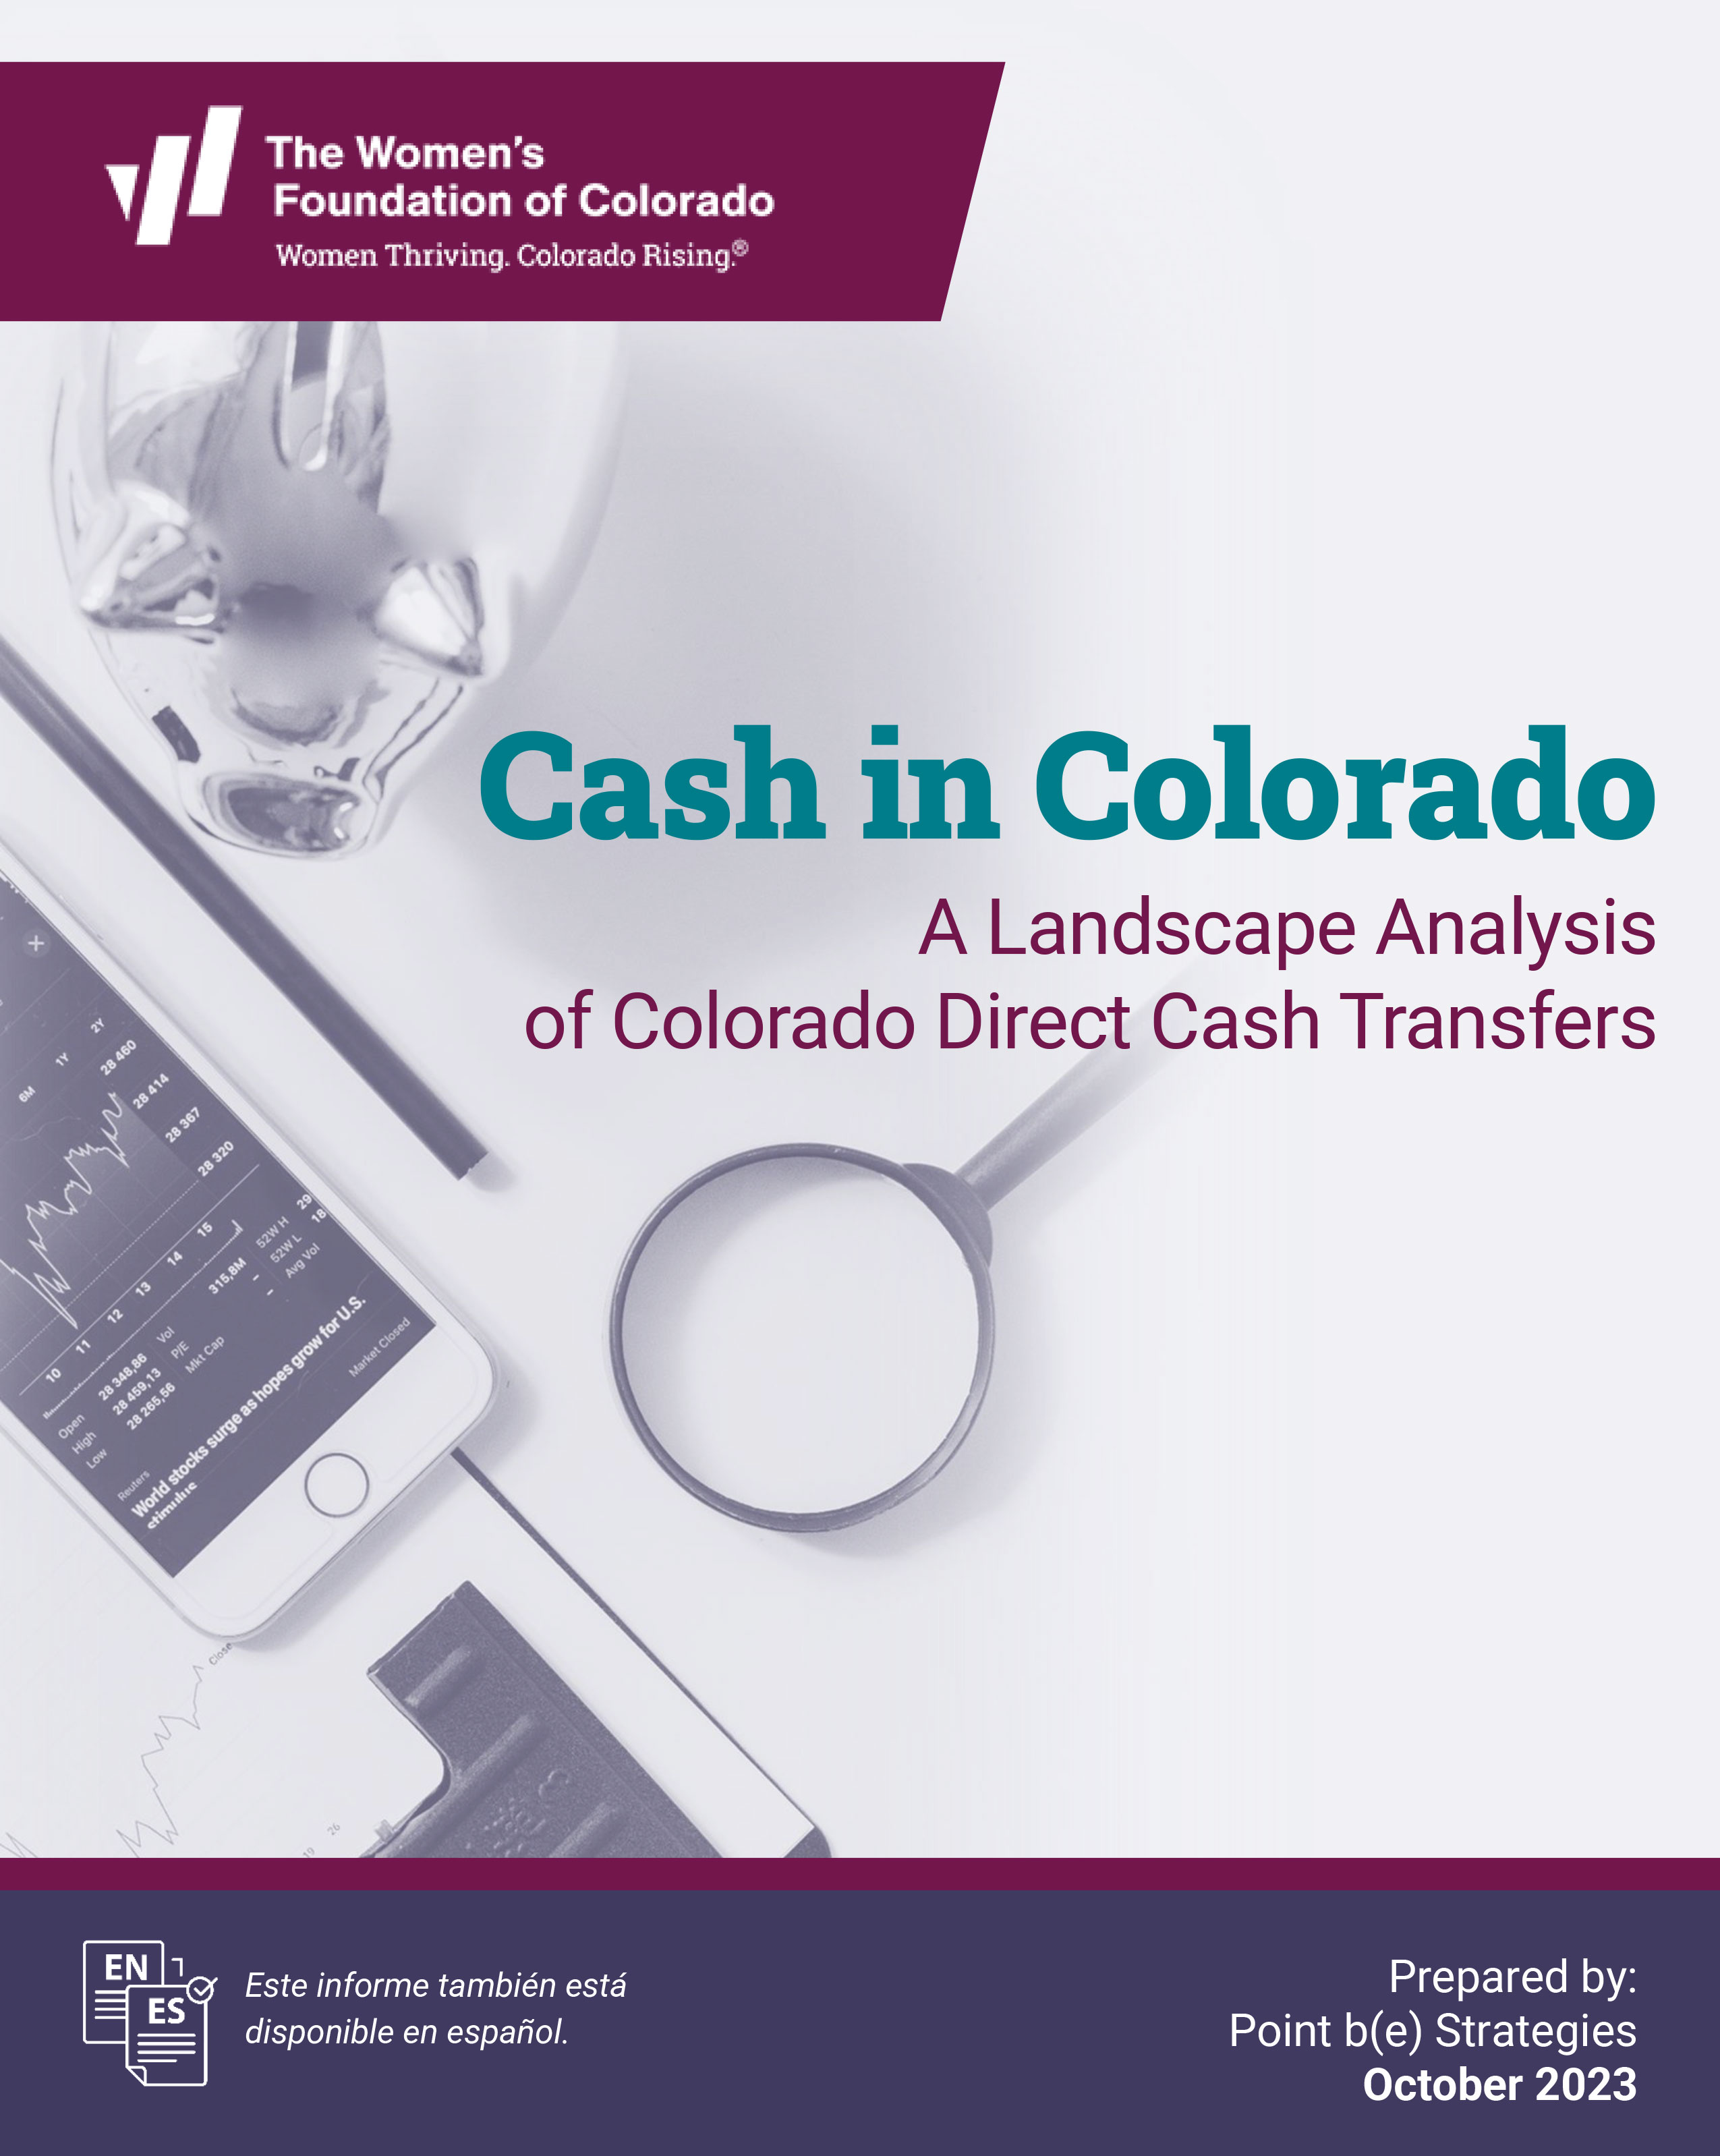 thumbnail of "Cash in Colorado: A Landscape Analysis of Colorado Direct Cash Transfers" report